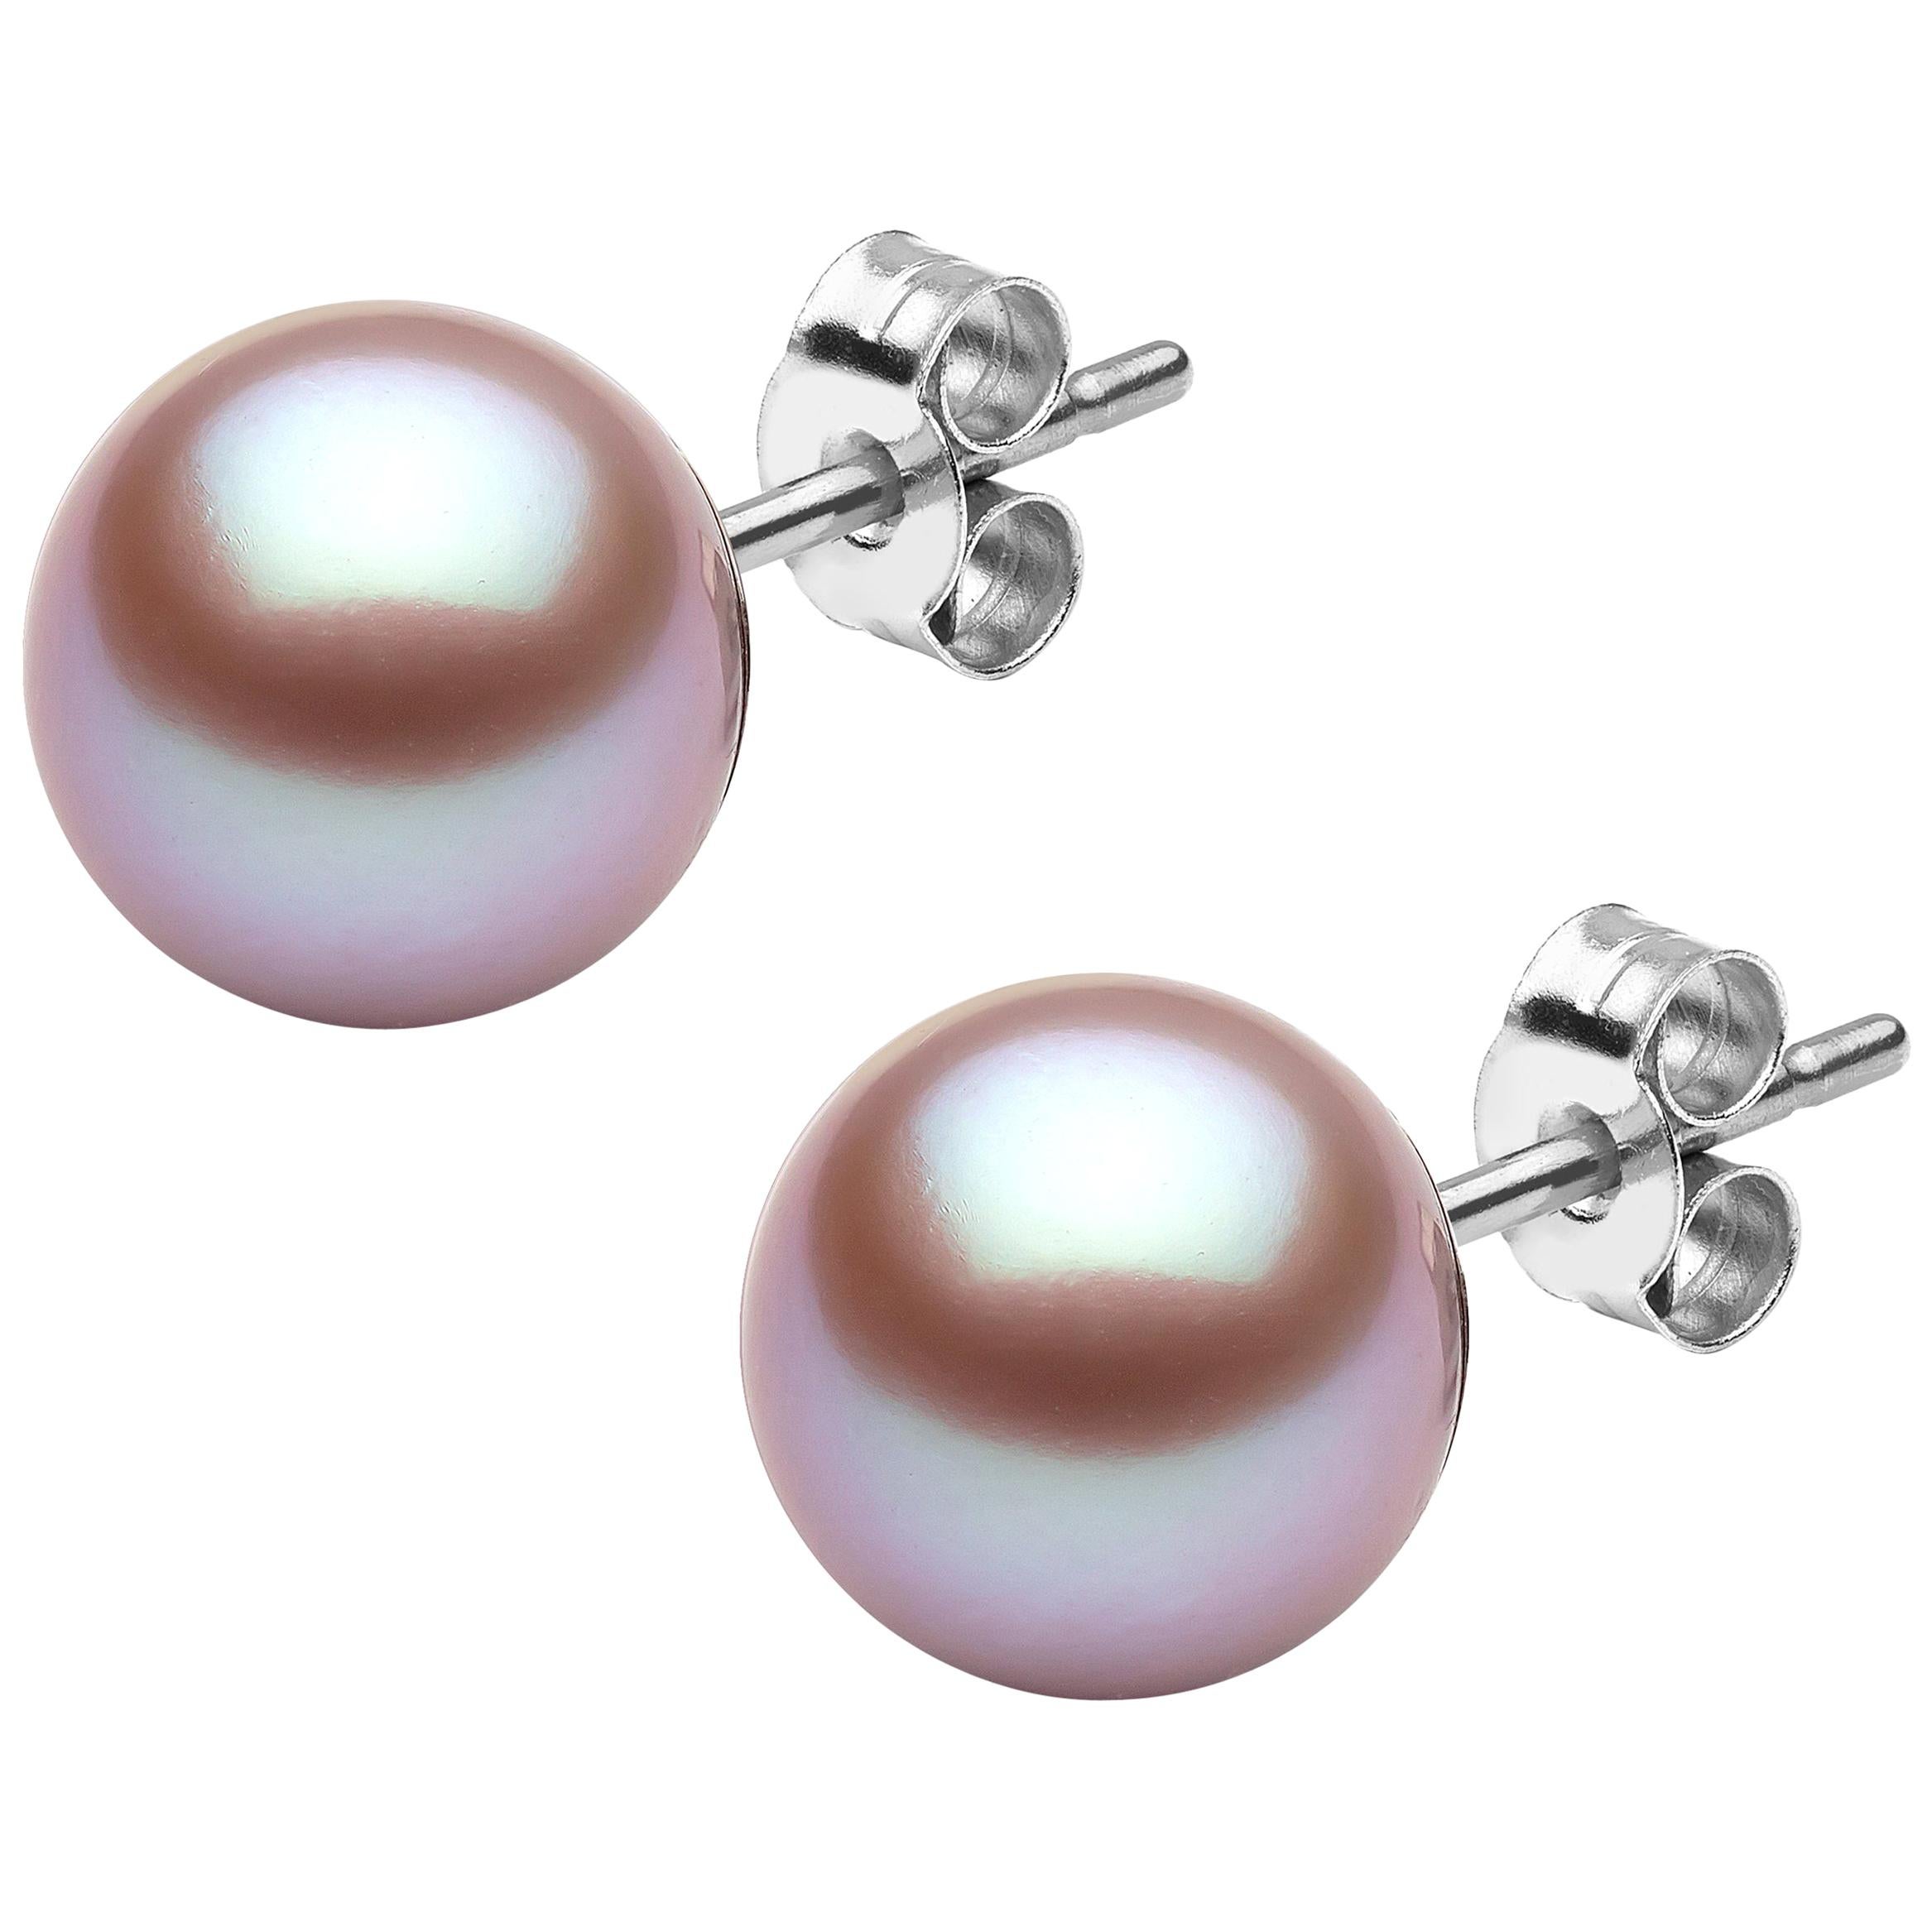 Yoko London Natural Pink Colour Classic Earring Studs on 18 Karat White Gold For Sale